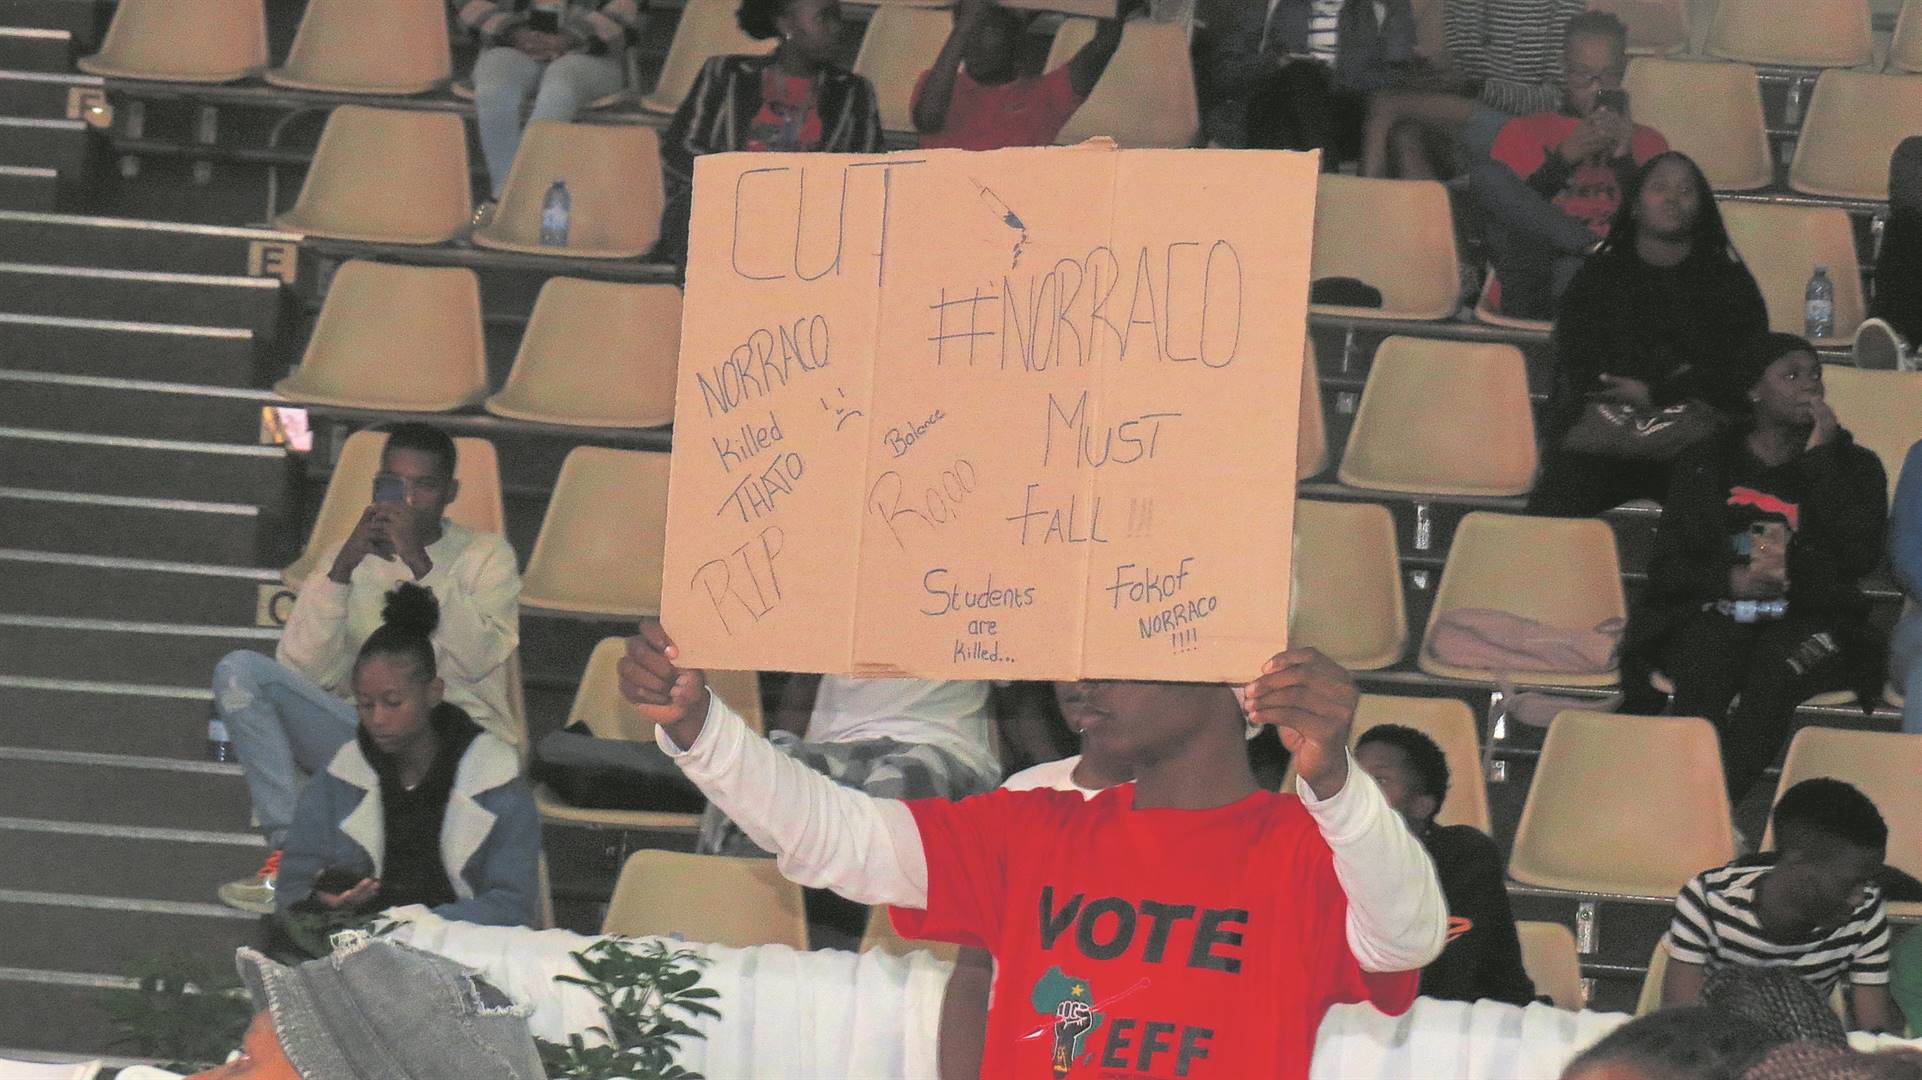 Another participant in the silent protest, which occurred at the Central University of Technology (CUT), Free State, in Bloemfontein.Photos: Teboho Setena